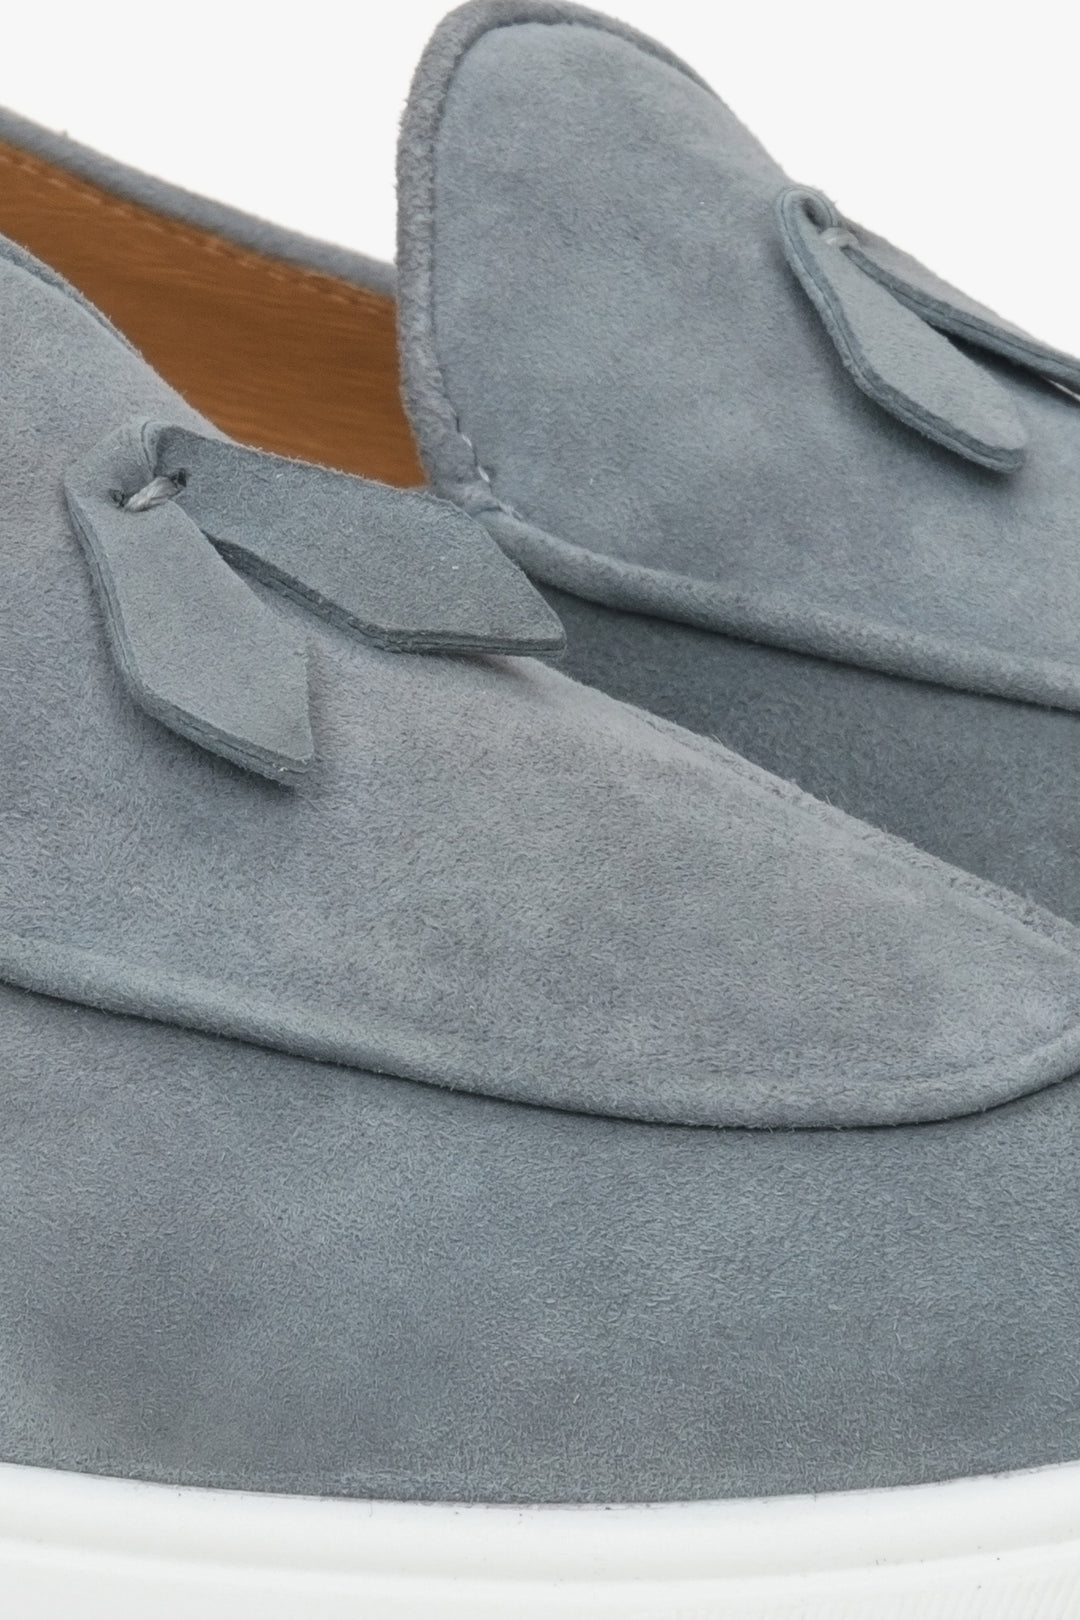 Women's grey velour loafers by Estro - close-up on details.